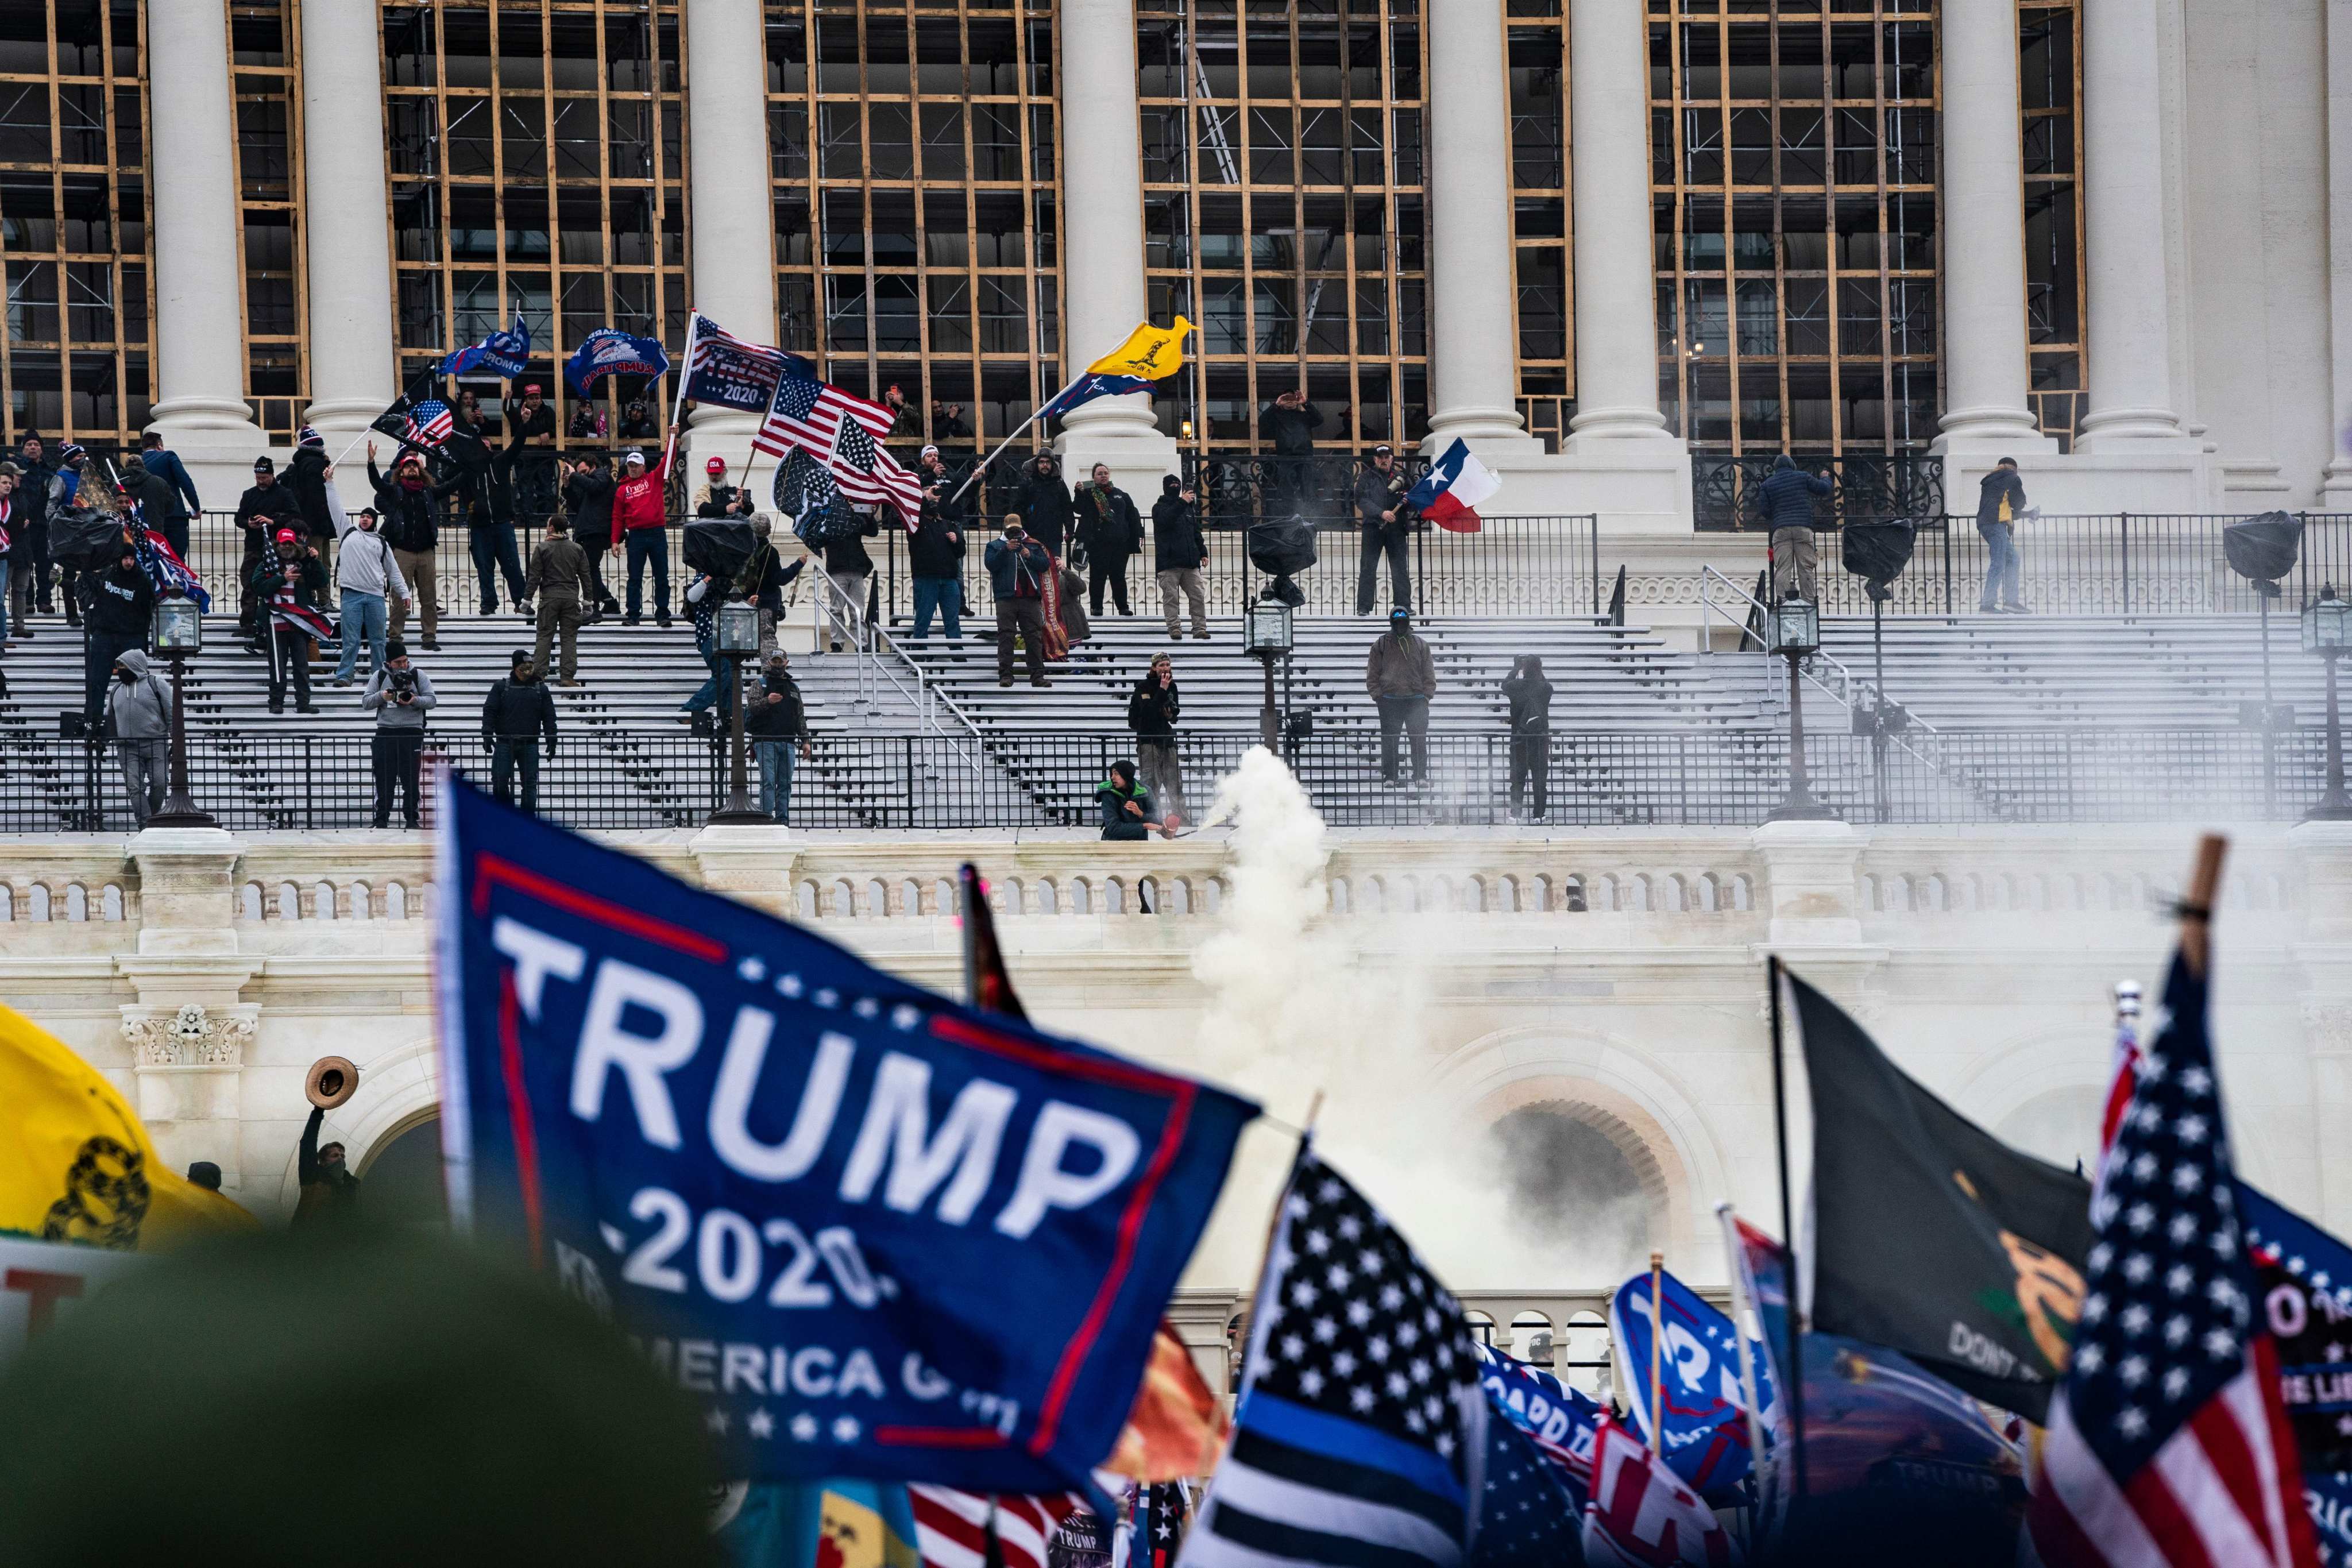 Supporters of Donald Trump clash with the US Capitol police during a riot at the US Capitol on January 6 in Washington. Trump’s supporters stormed a session of Congress held to certify Joe Biden’s election win, triggering unprecedented chaos and violence at the heart of American democracy and accusations the president was attempting a coup. Photo: TNS